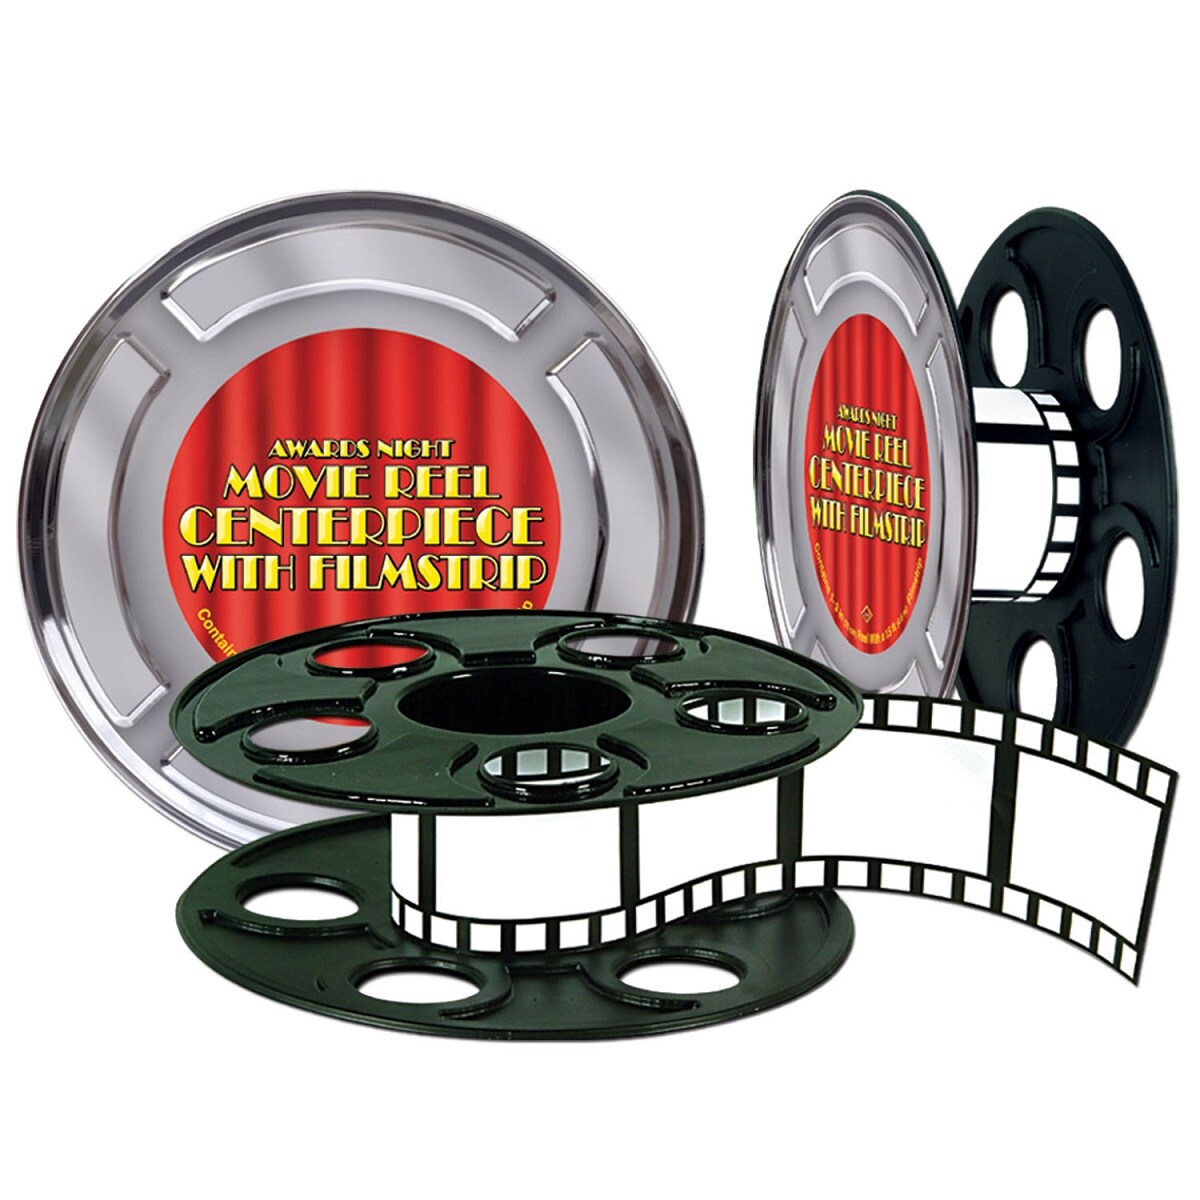 Party Central Club Pack of 12 White and Black Awards Night Movie Reel with  Filmstrip Centerpiece 15